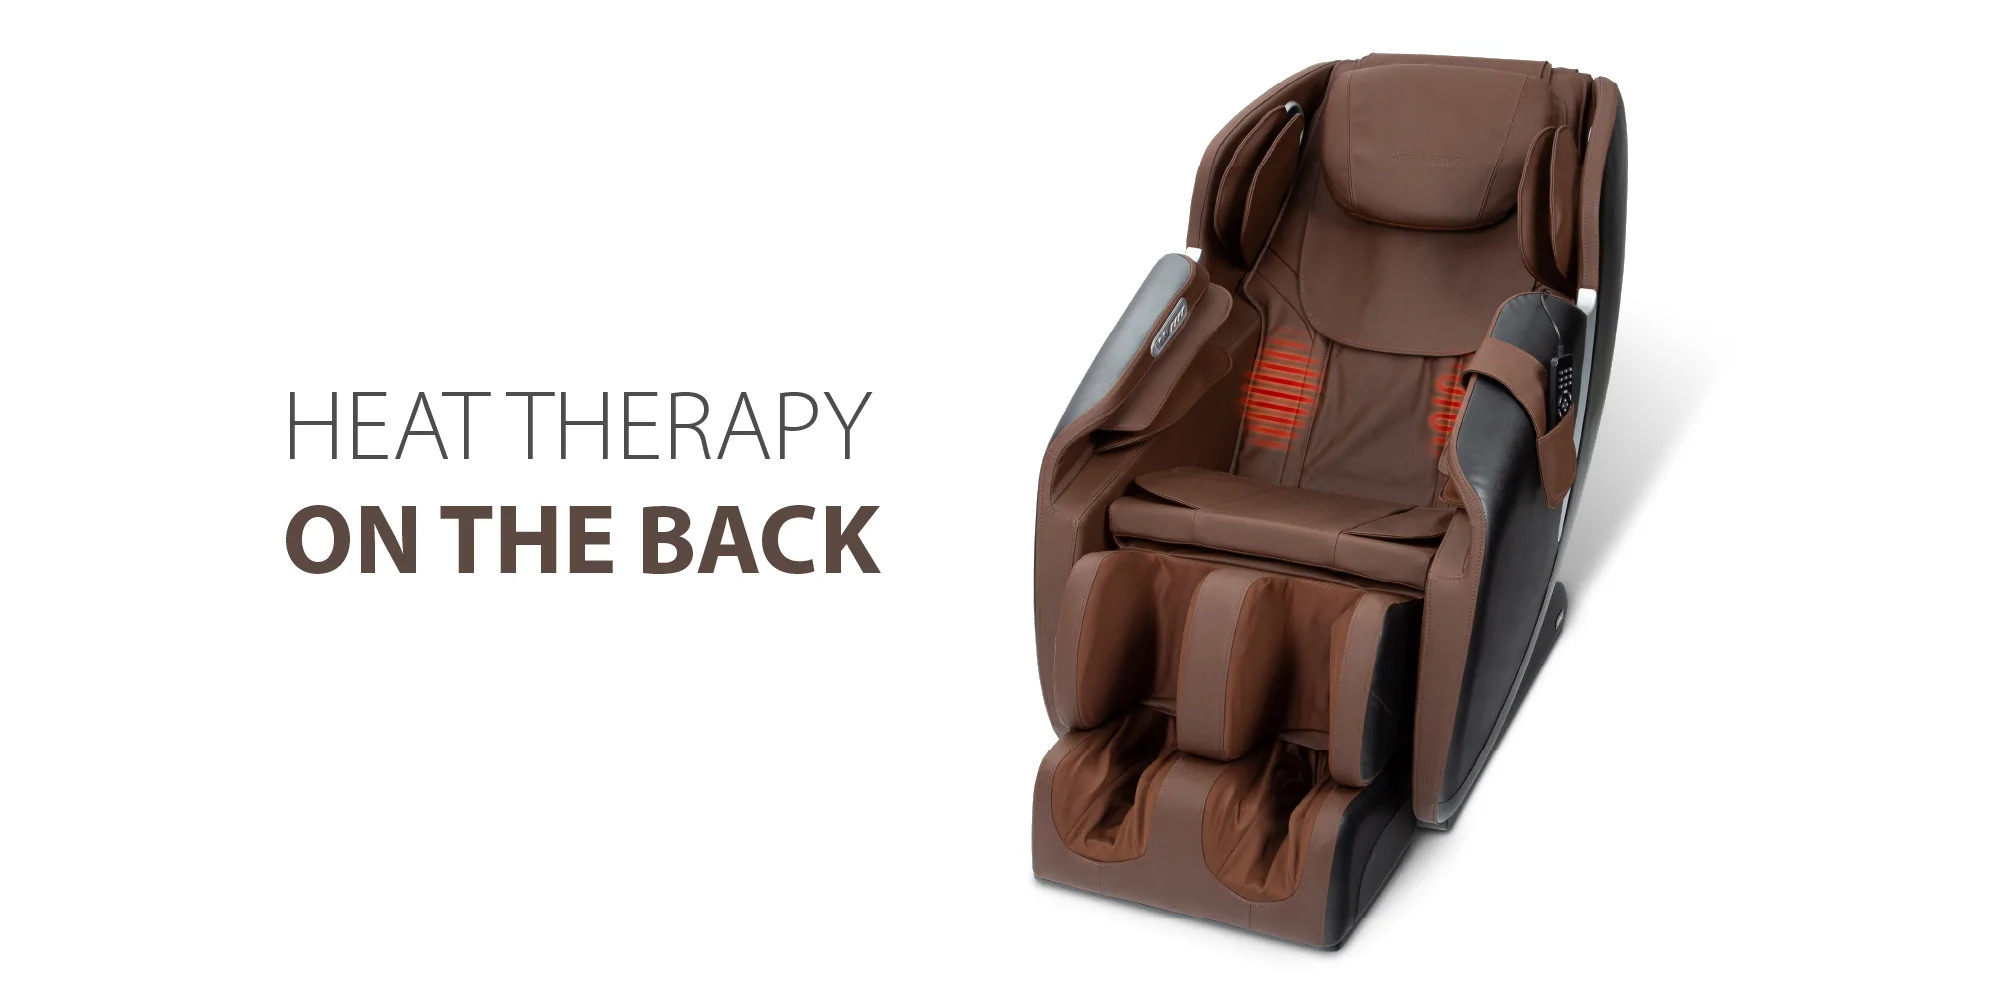 AmaMedic R7 Massage Chair, Heat Therapy